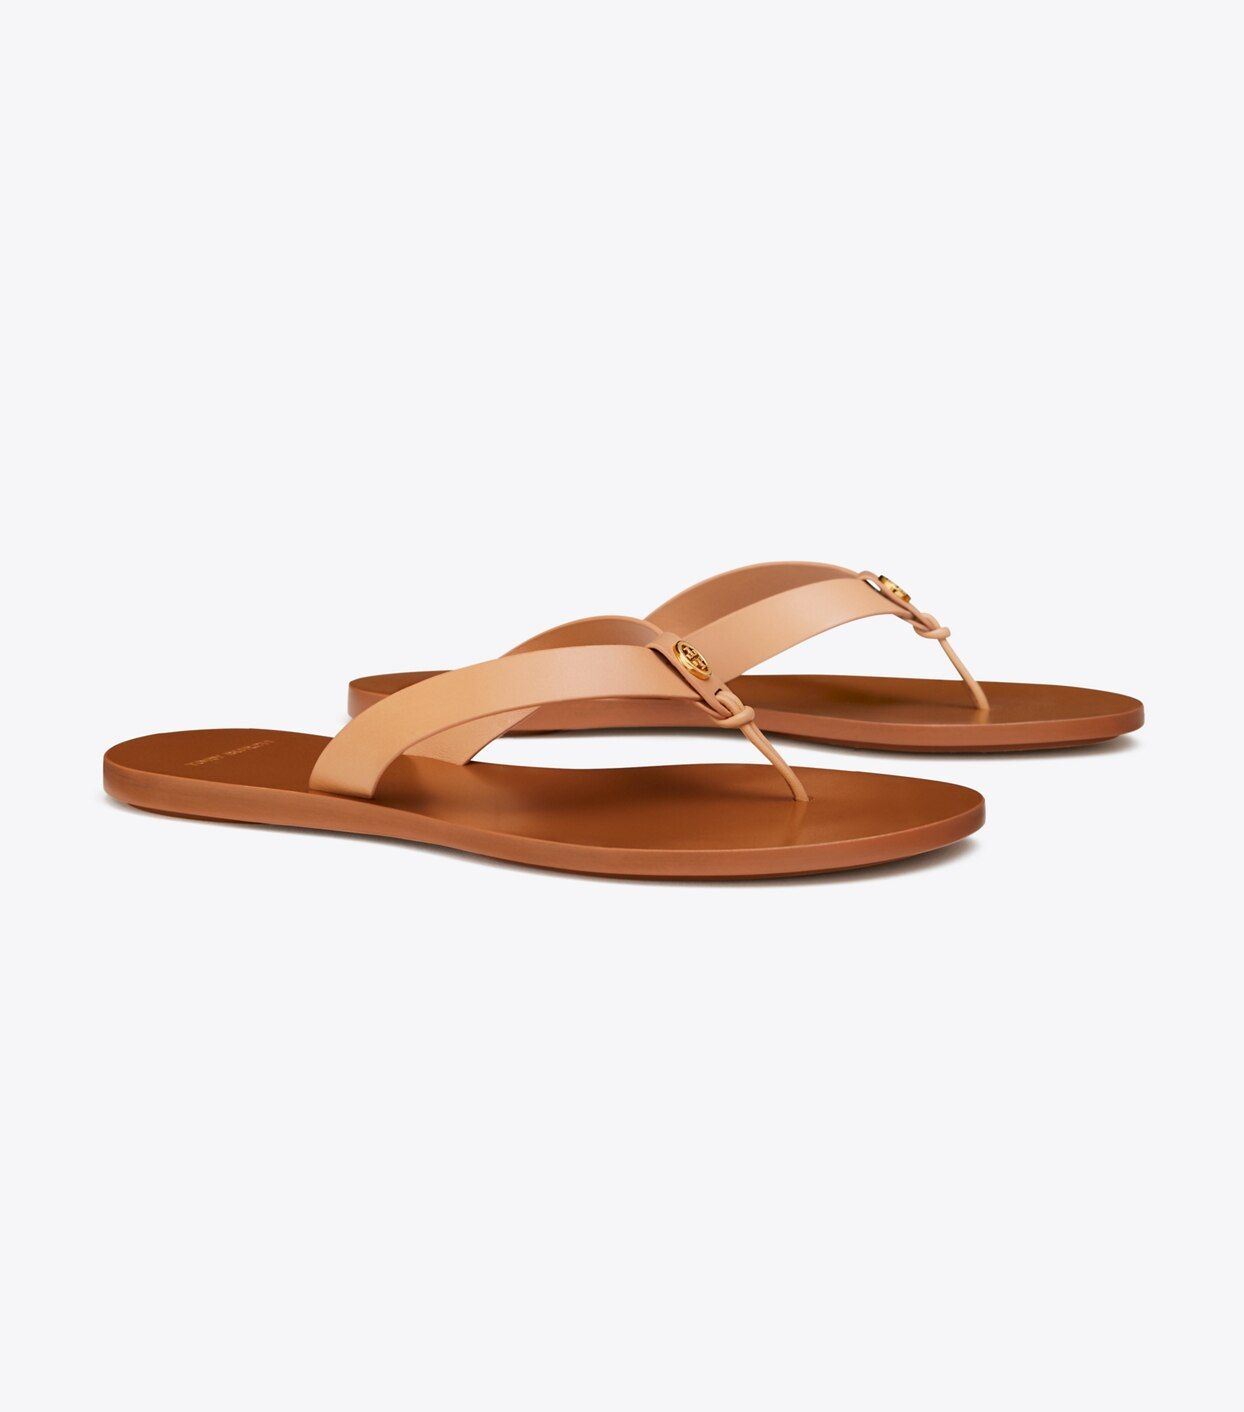 The perfect minimal flip-flop: the Manon Thong Sandal combines wide leather straps that keep the ... | Tory Burch (US)